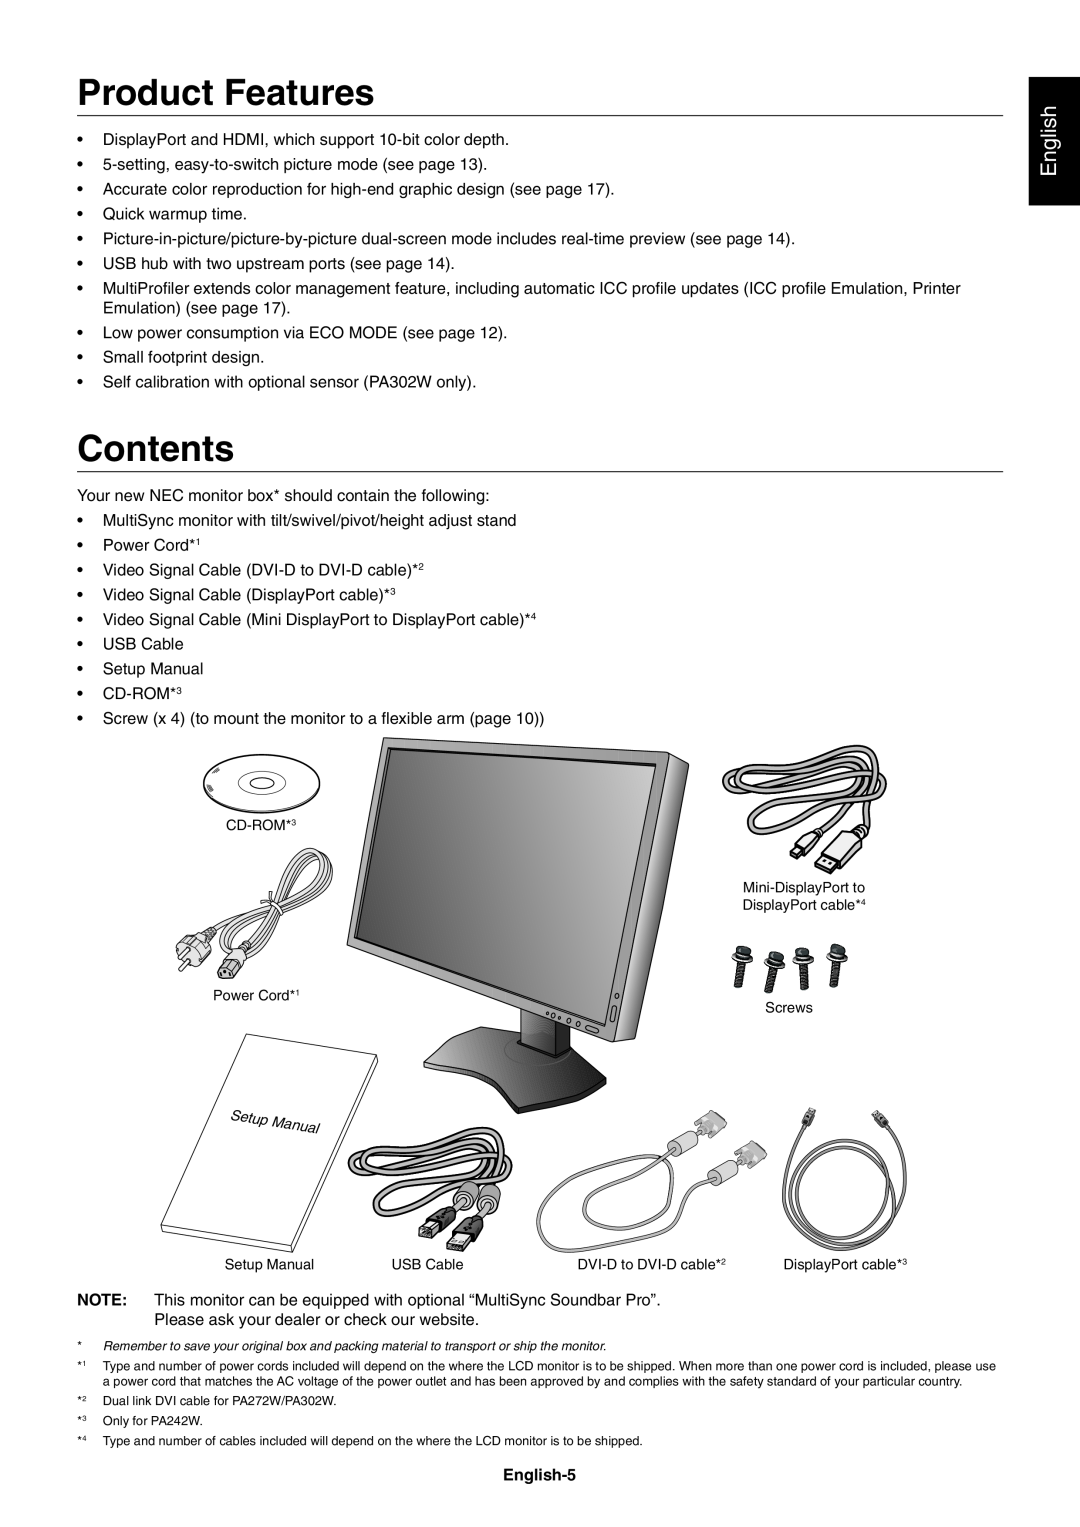 NEC PA242W user manual Product Features, Contents, English-5 